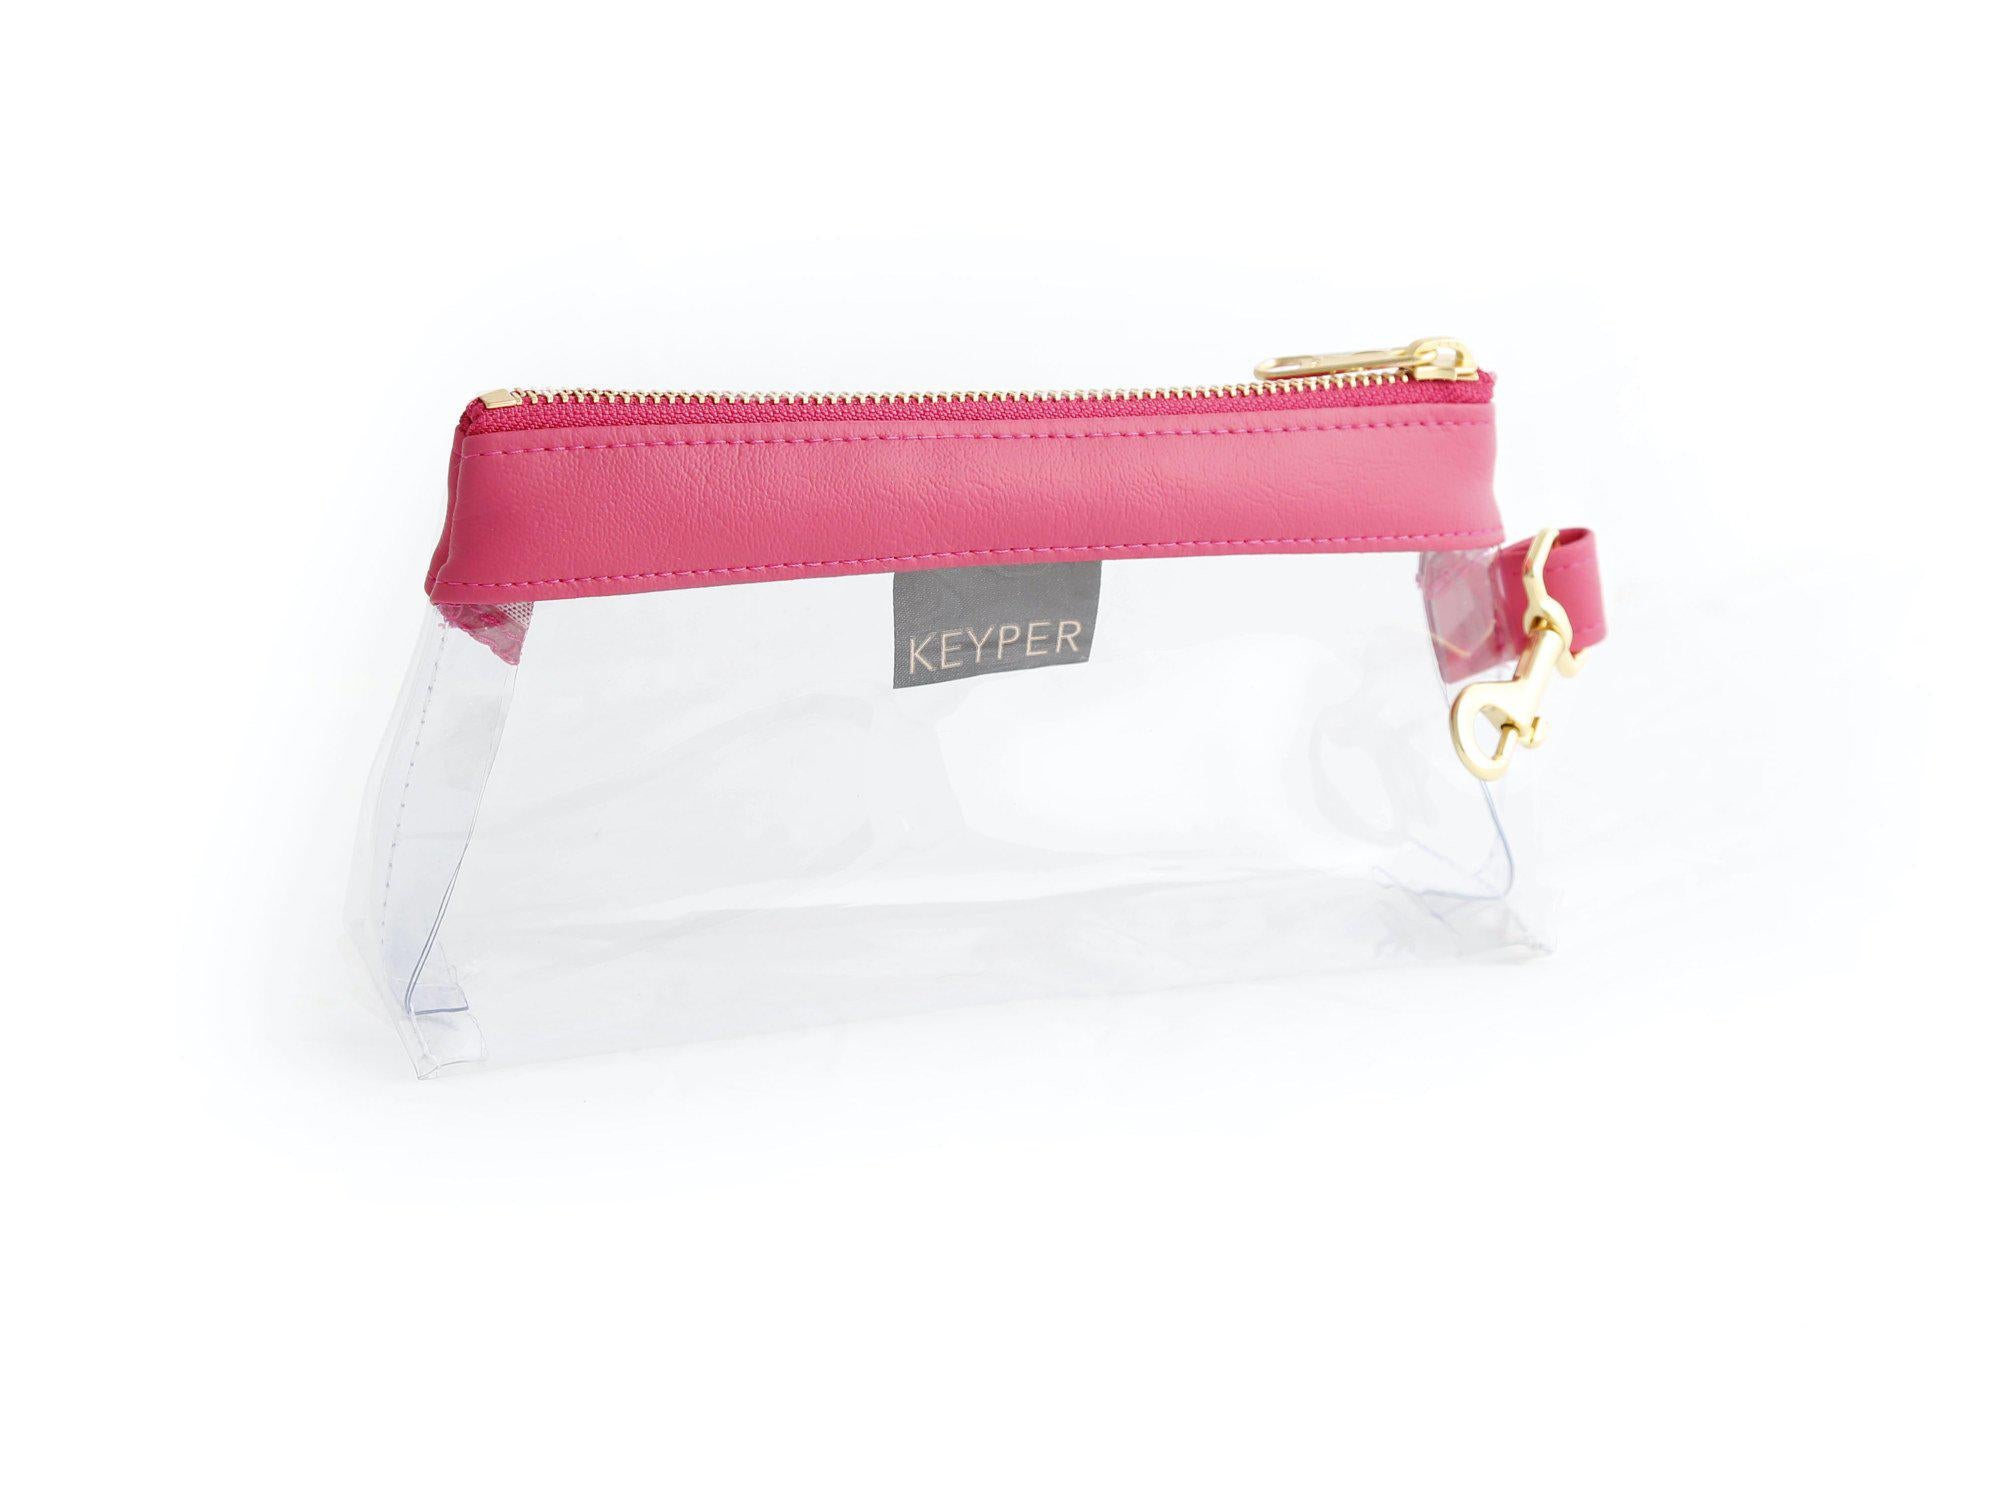 University Clear Purse with Reversible Patterned Shoulder Straps - mul –  Sorelle Gifts